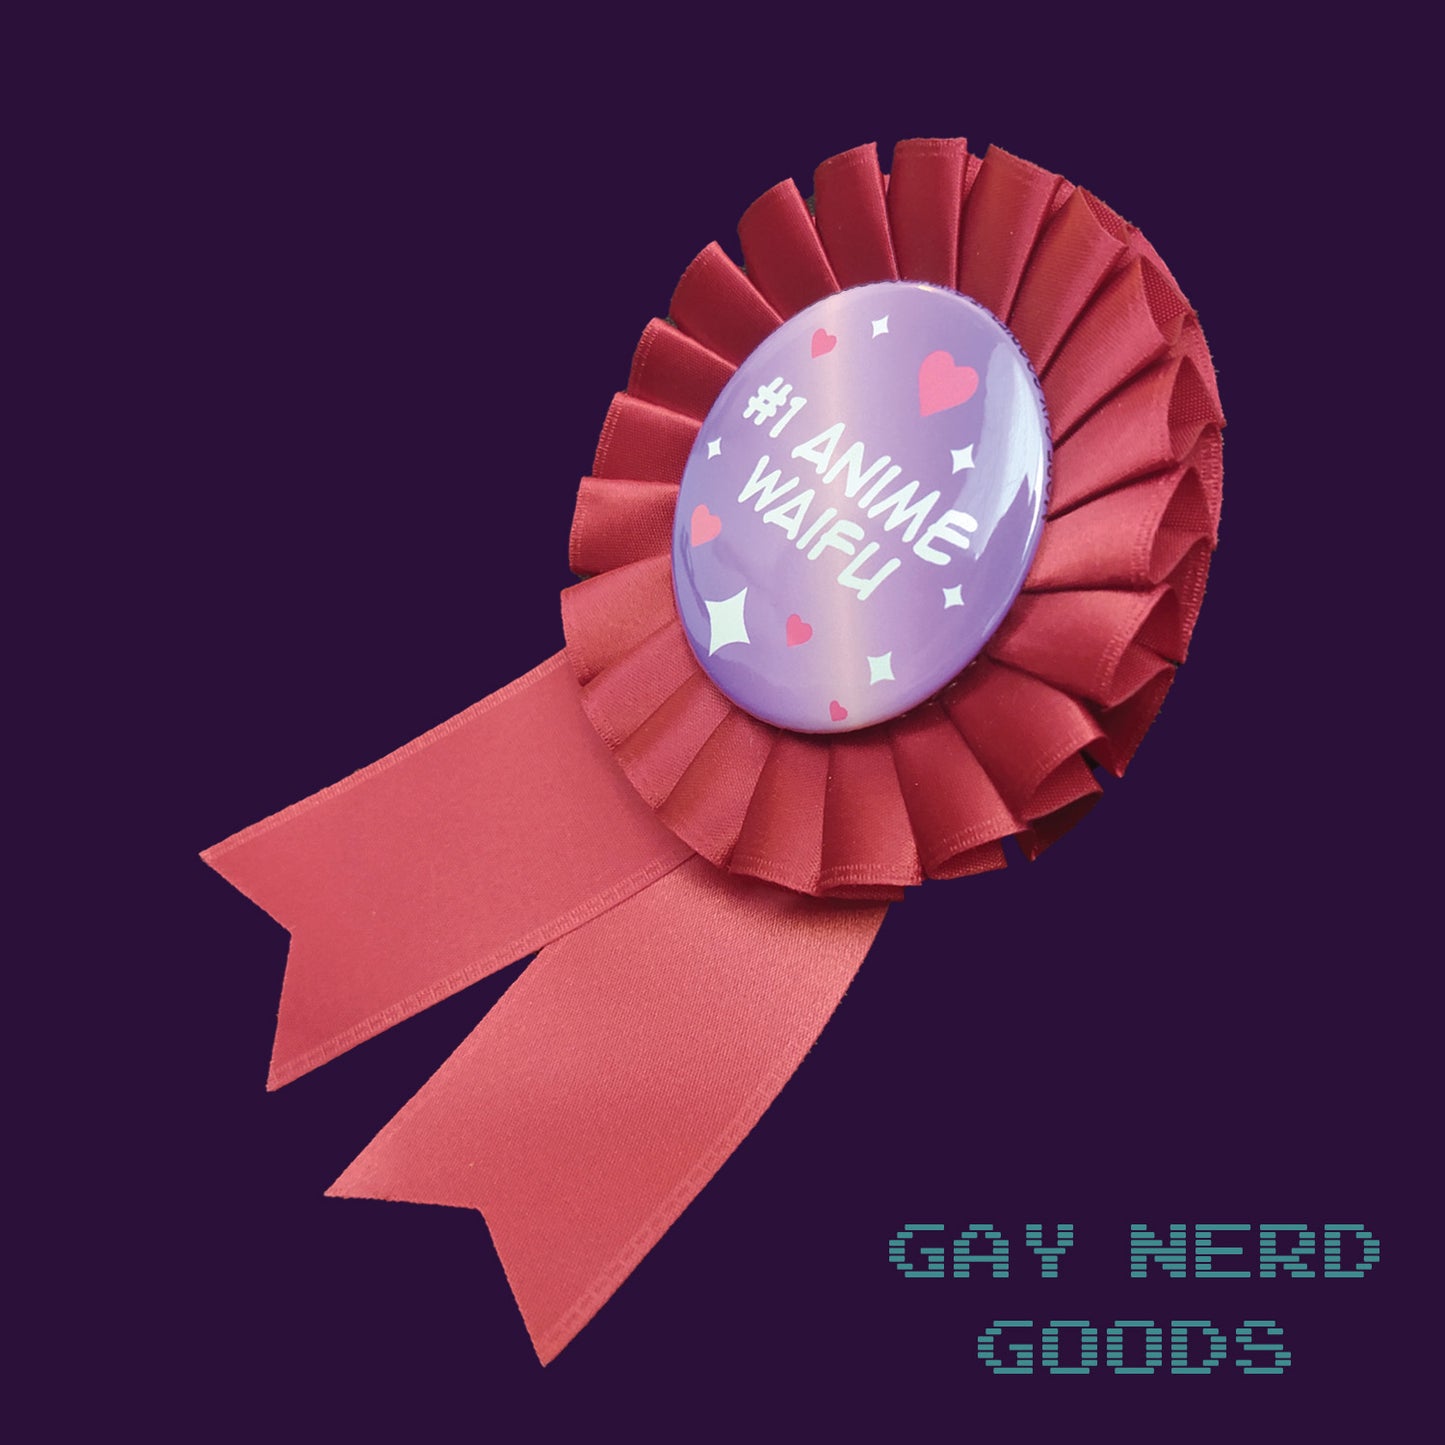 side angle view of the red #1 anime waifu prize ribbon on a purple background